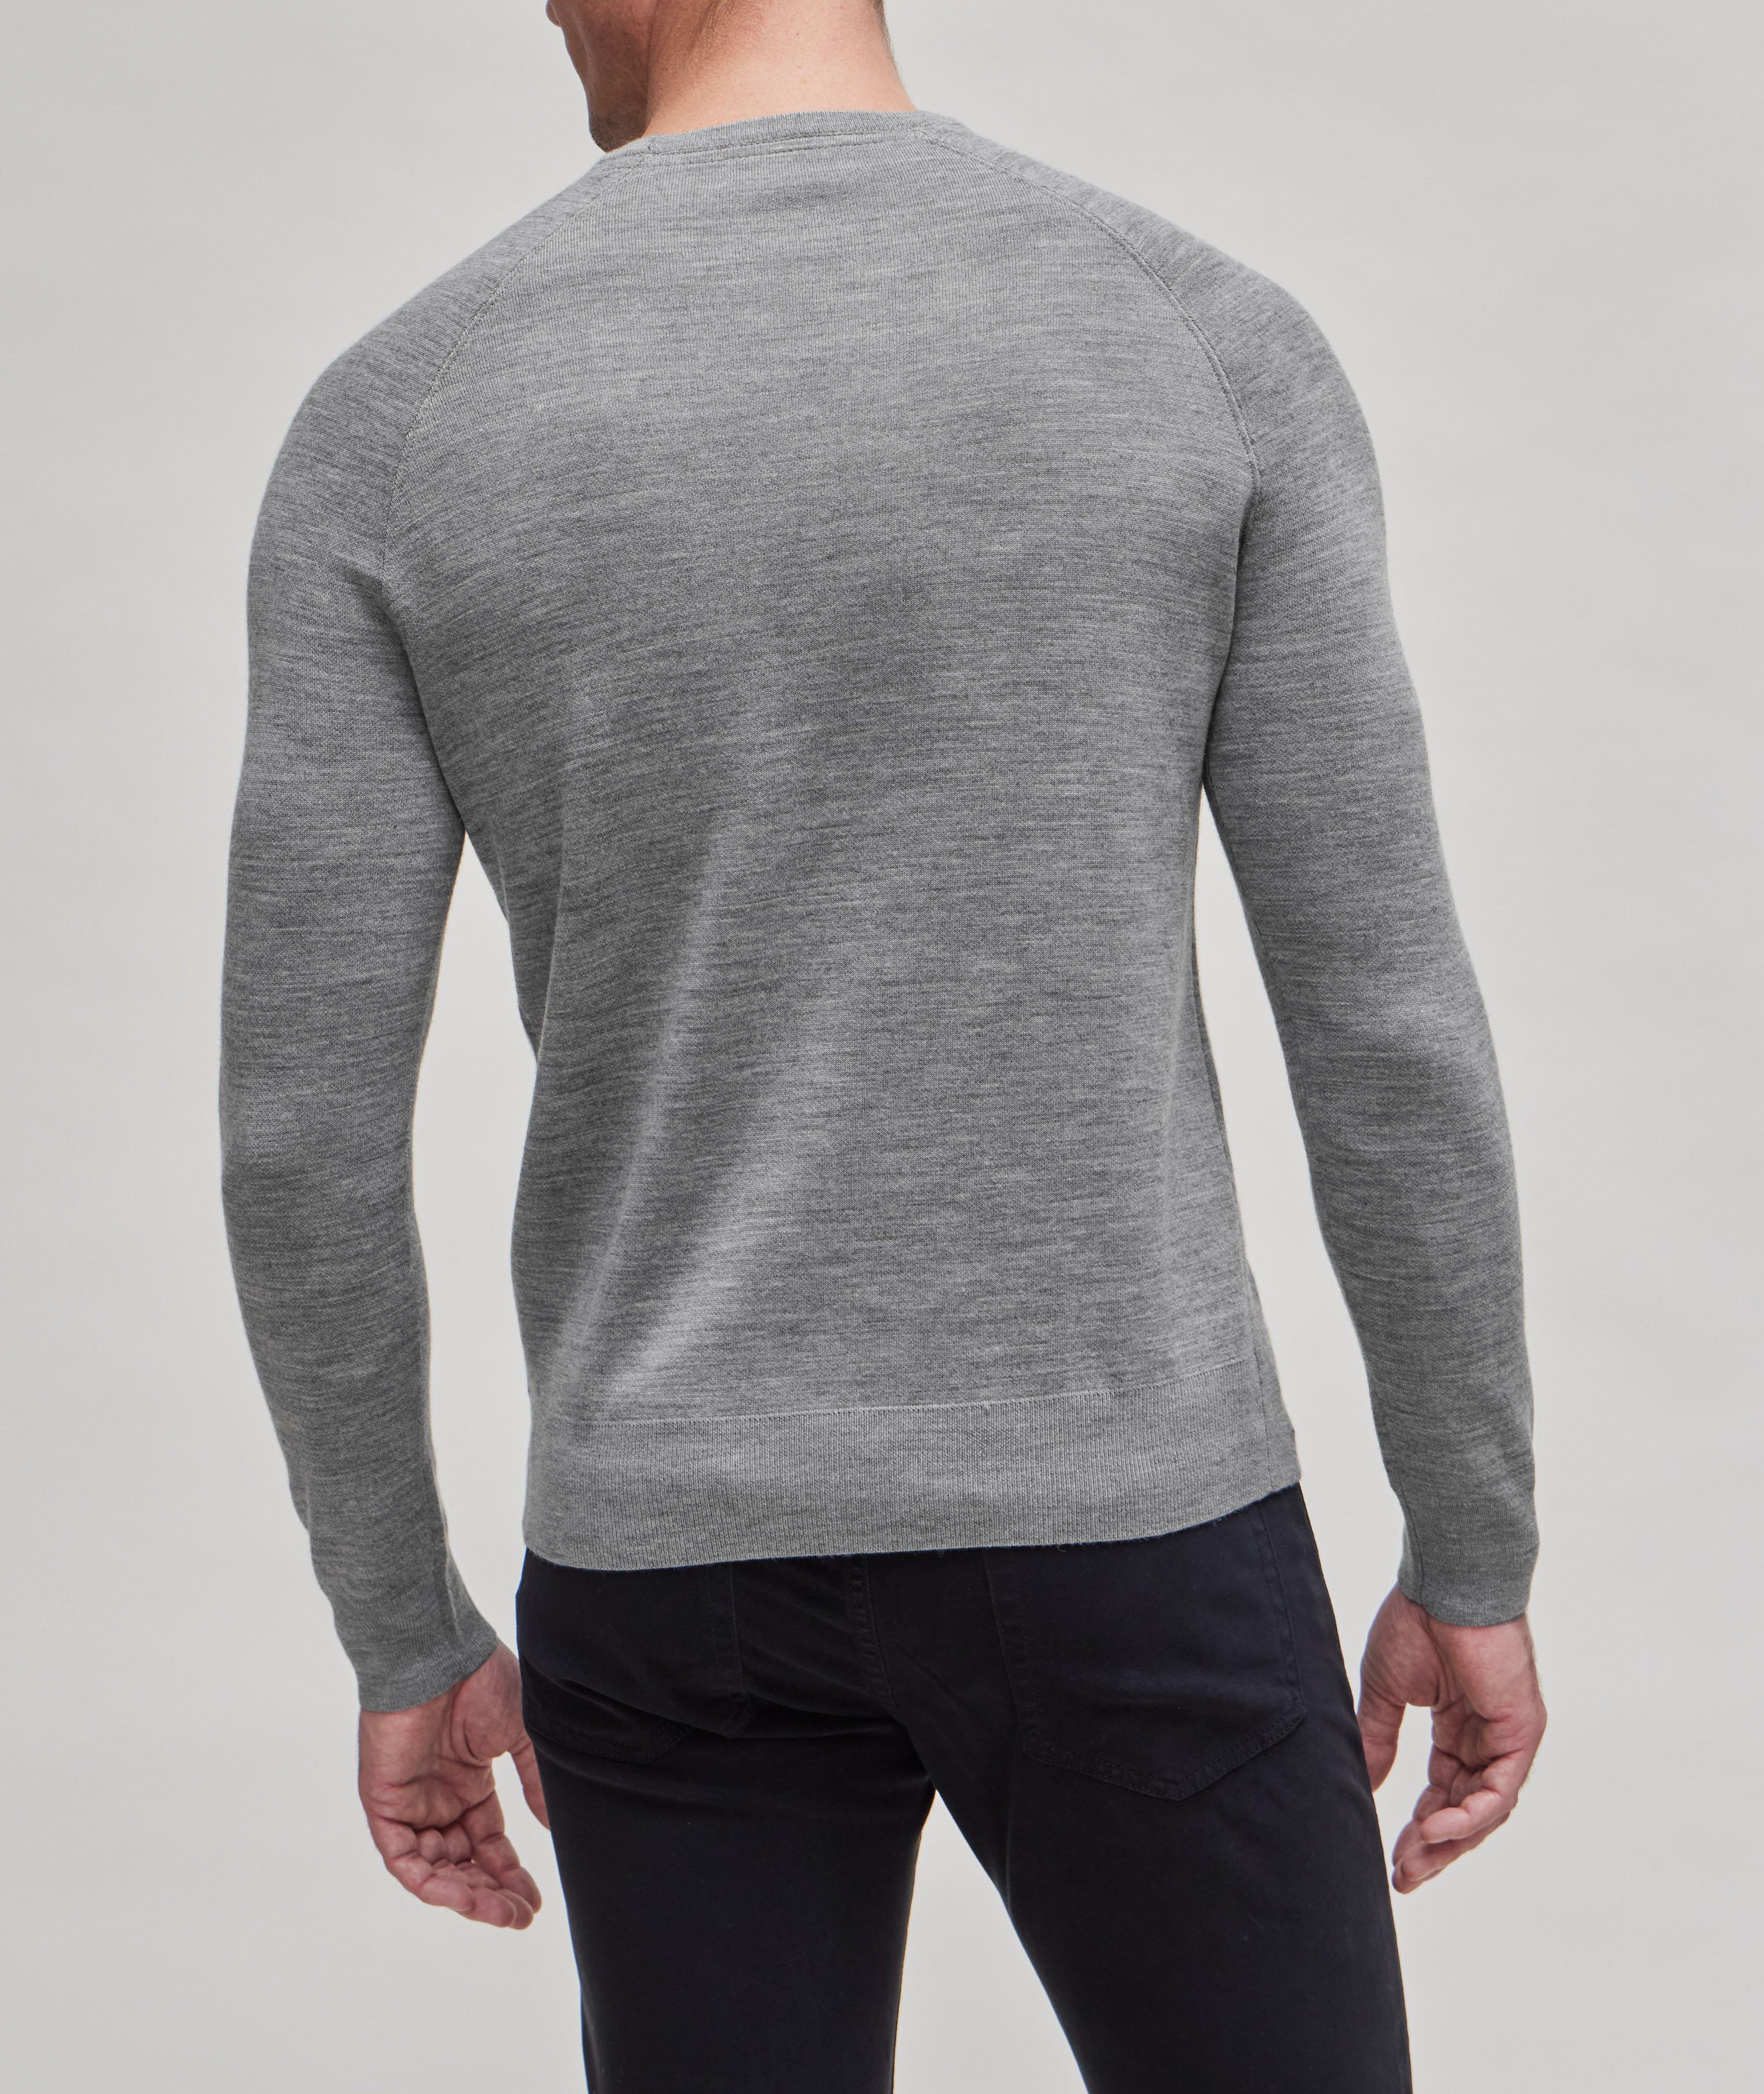 Brushed Double-Faced Merino Wool-Blend Sweater image 2